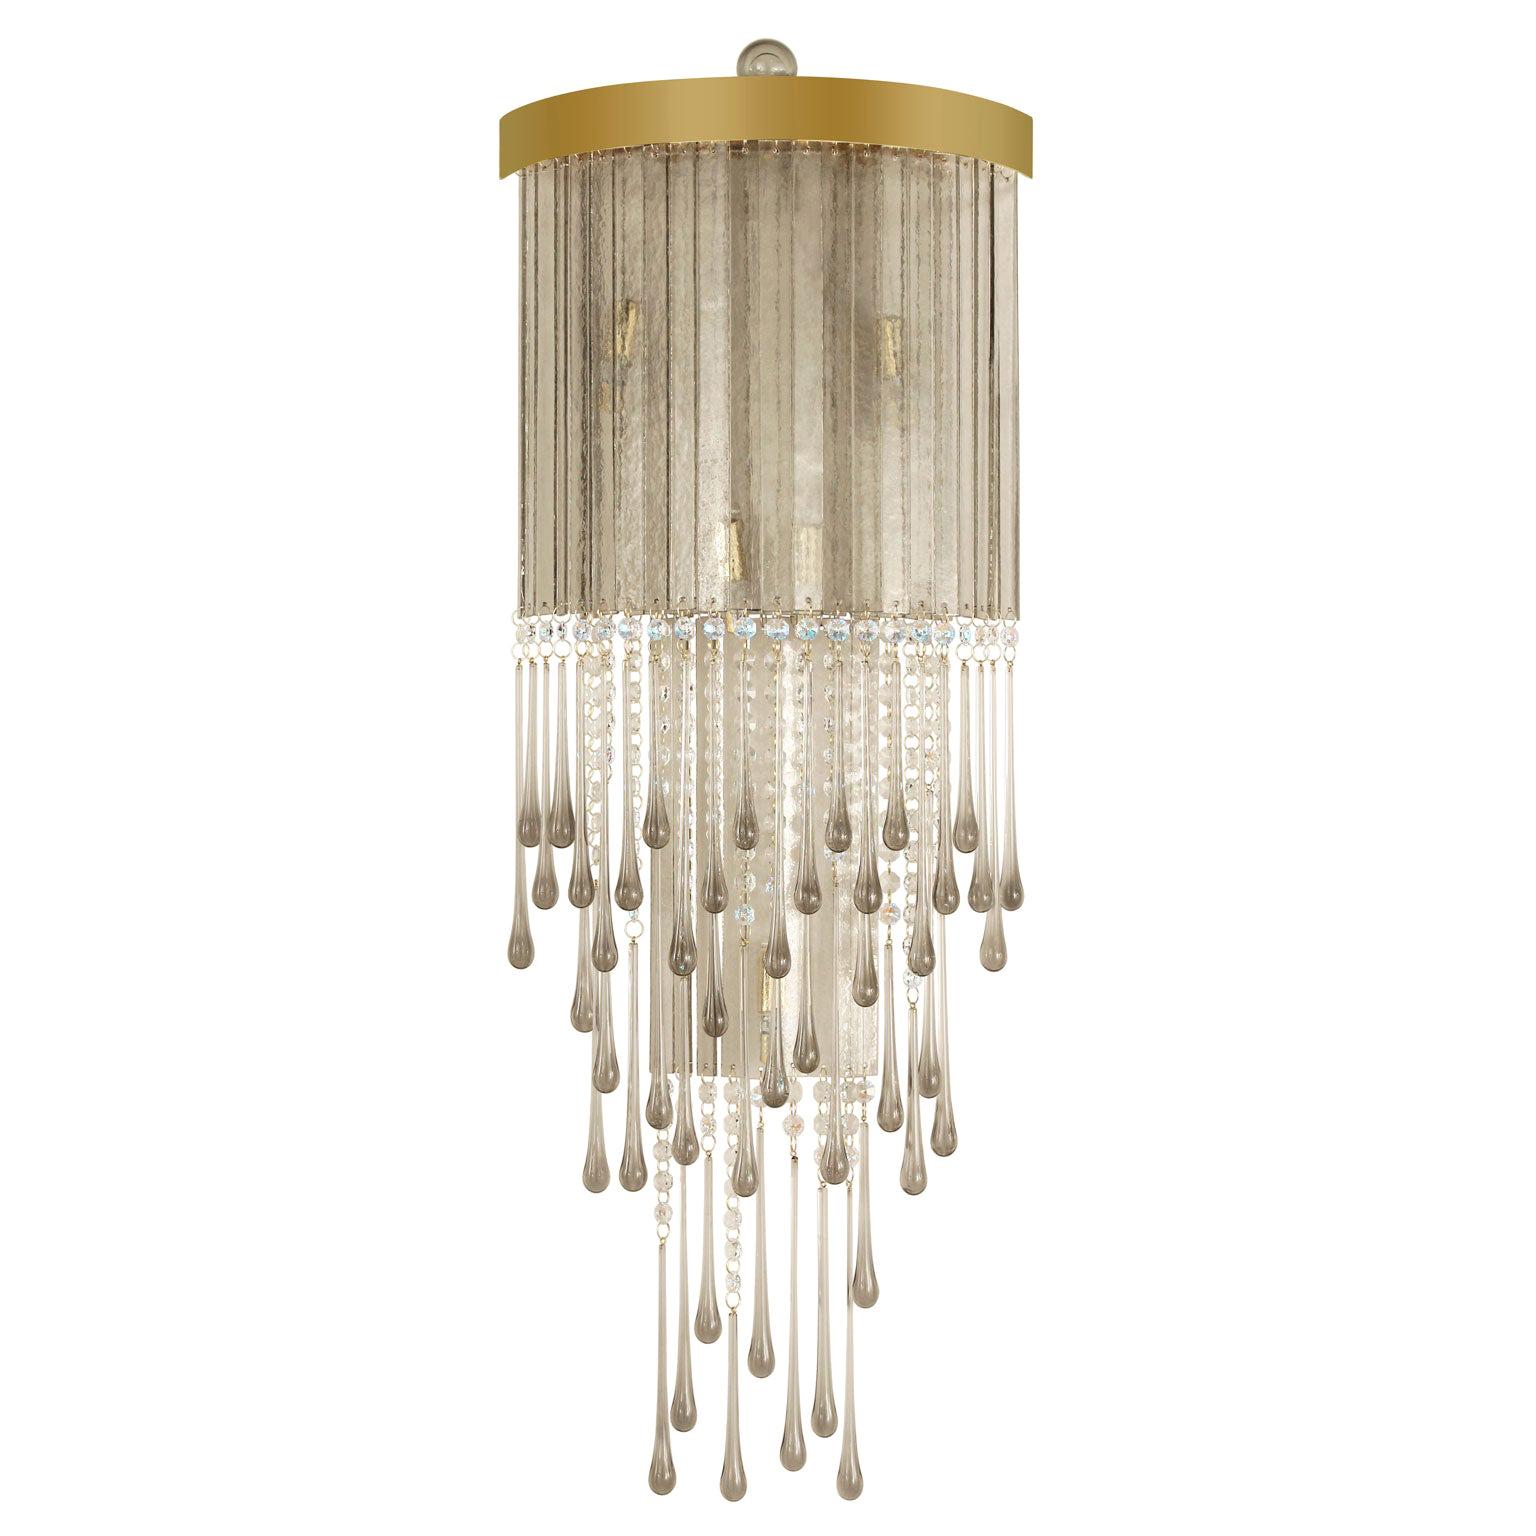 Artistic sconce Grey Murano Glass by Multiforme